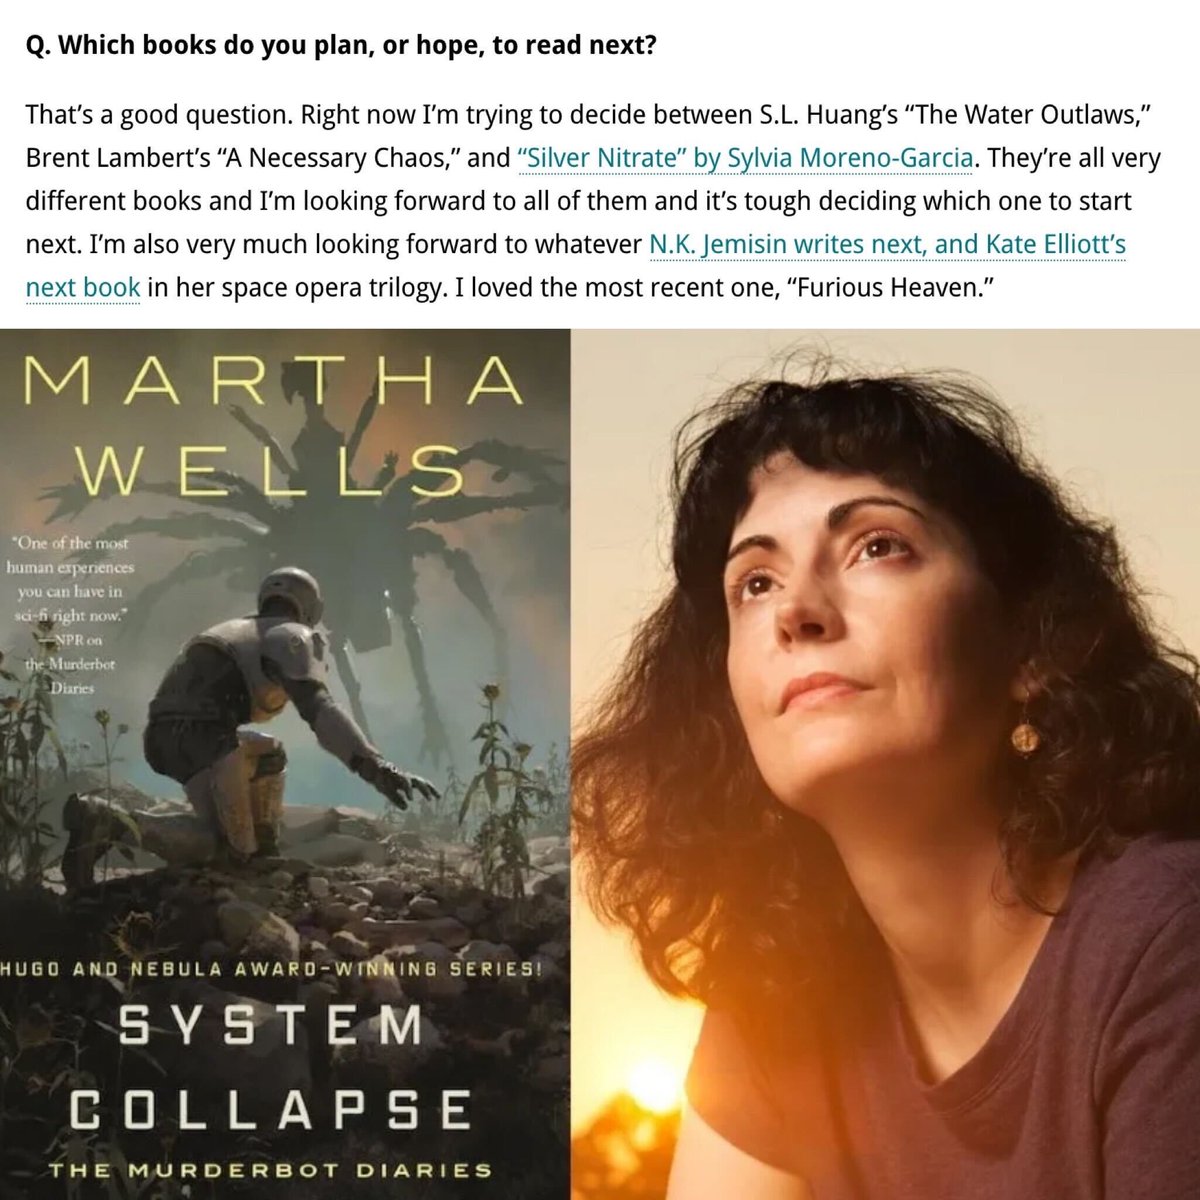 An amazing way to kick off the week is by taking in the idea that the MARTHA WELLS is trying to decide if my book is something she wants to read next!! 😍😍😍